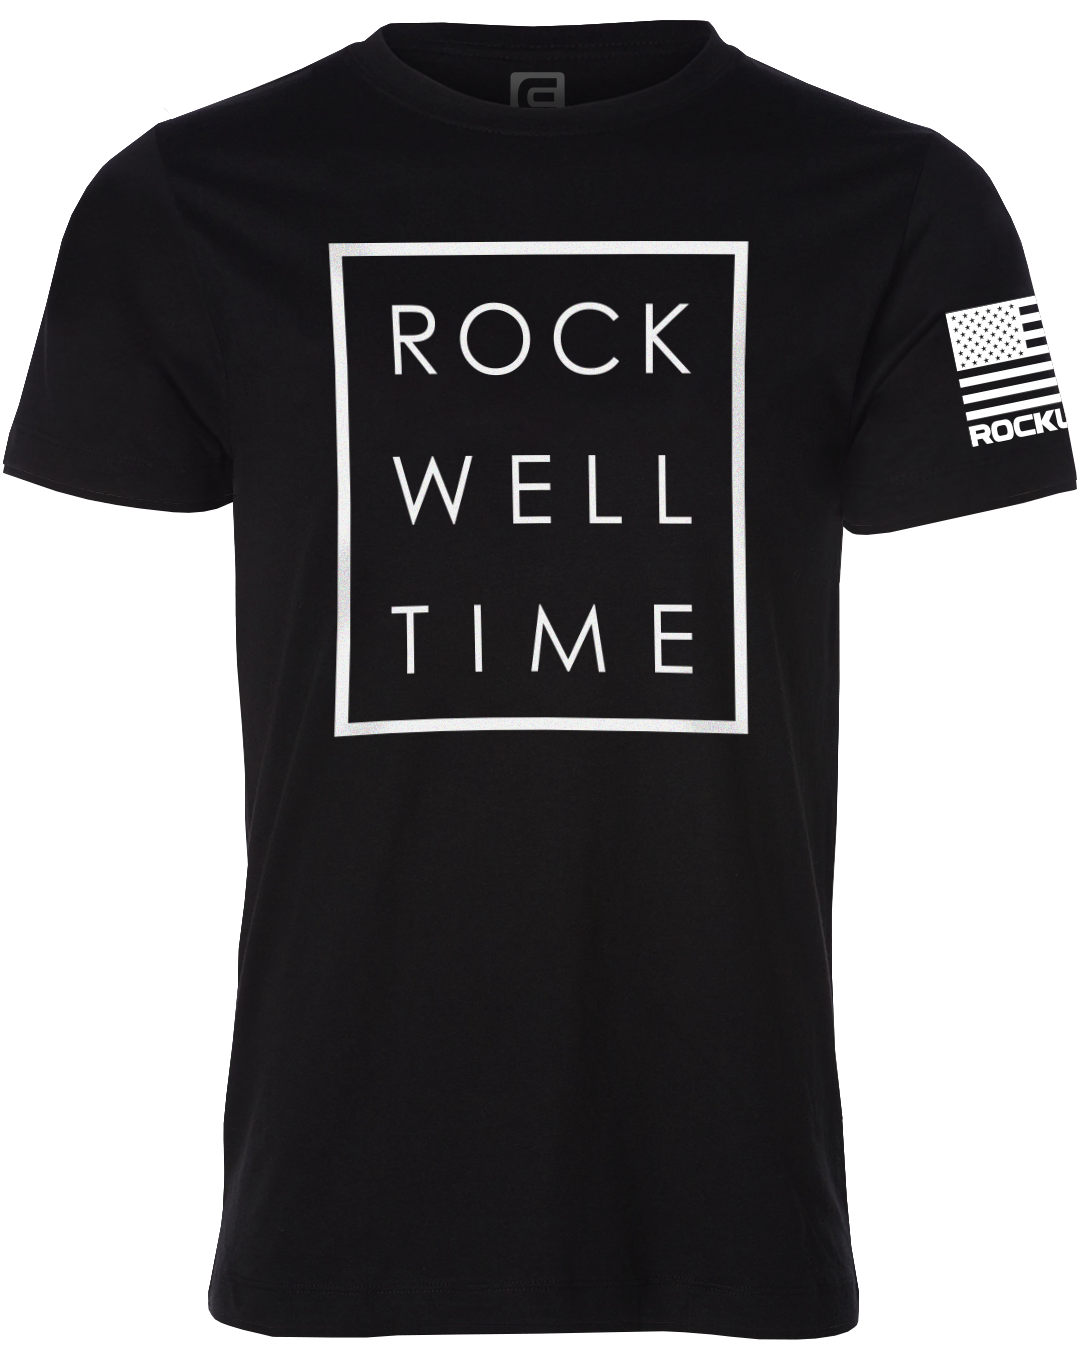 rockwell forte logo on the front. Rockwell flag logo on the sleeve